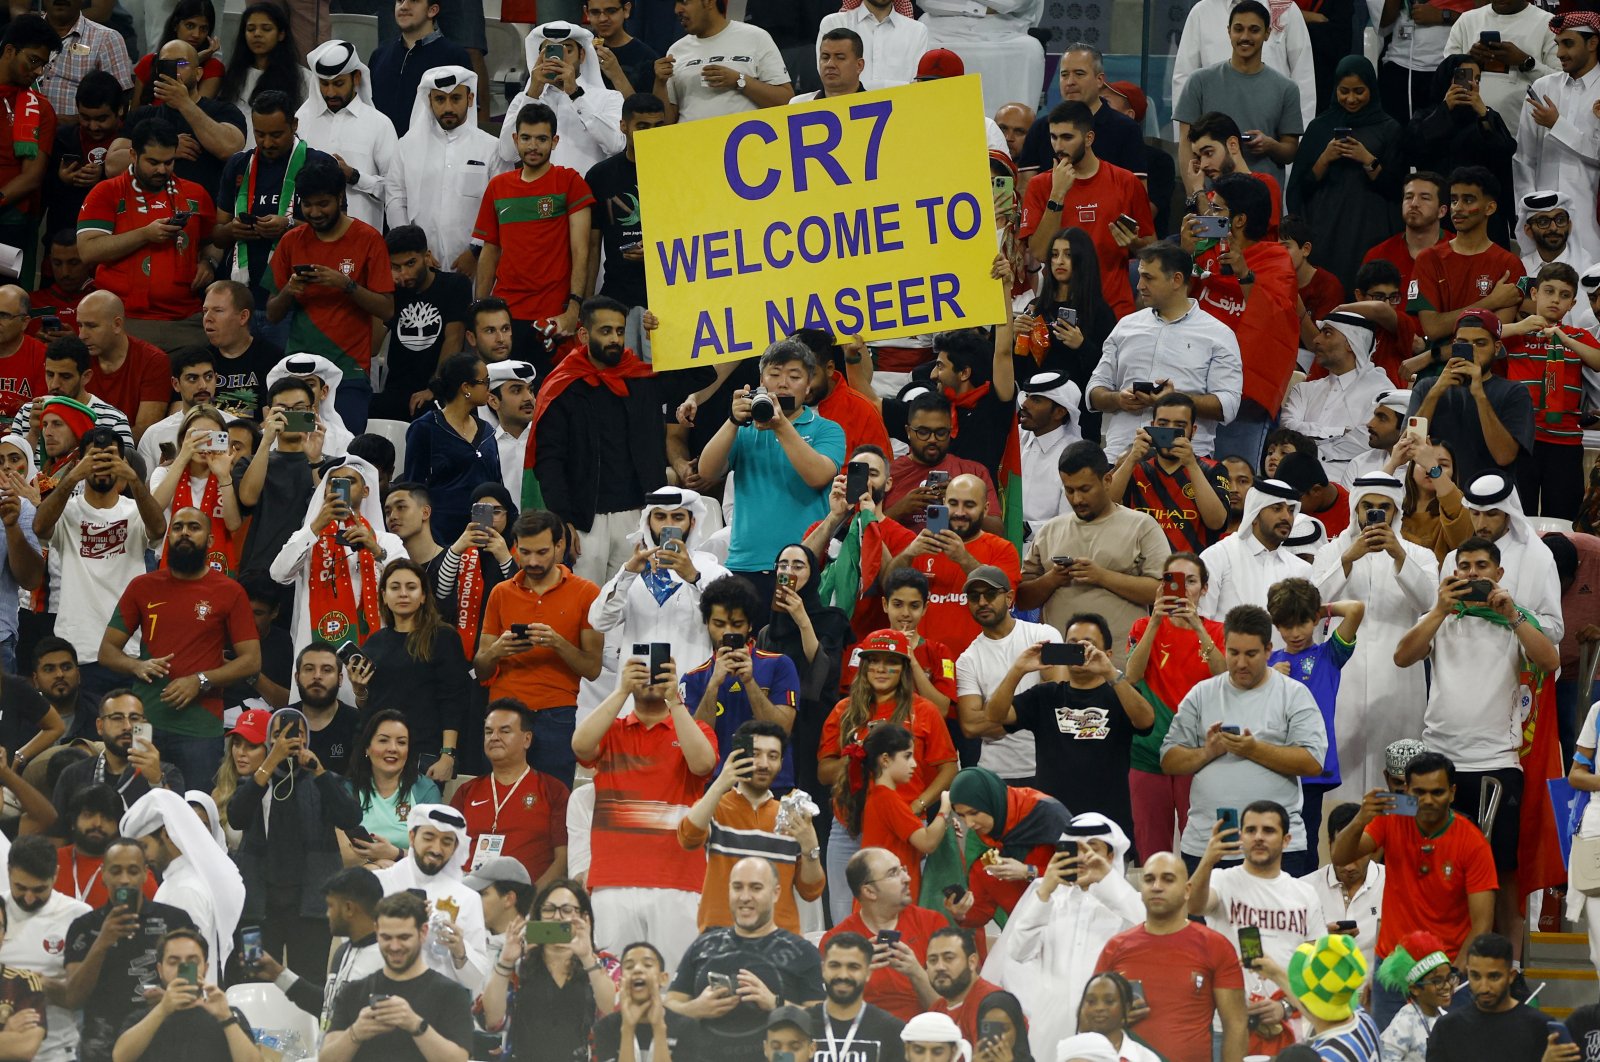 Fans hold up a sign inside the stadium with a message welcoming Cristiano Ronaldo to Al Nassr due to his prospective transfer to the Lusail Stadium, Lusail, Qatar, Dec. 6, 2022. (Reuters Photo)